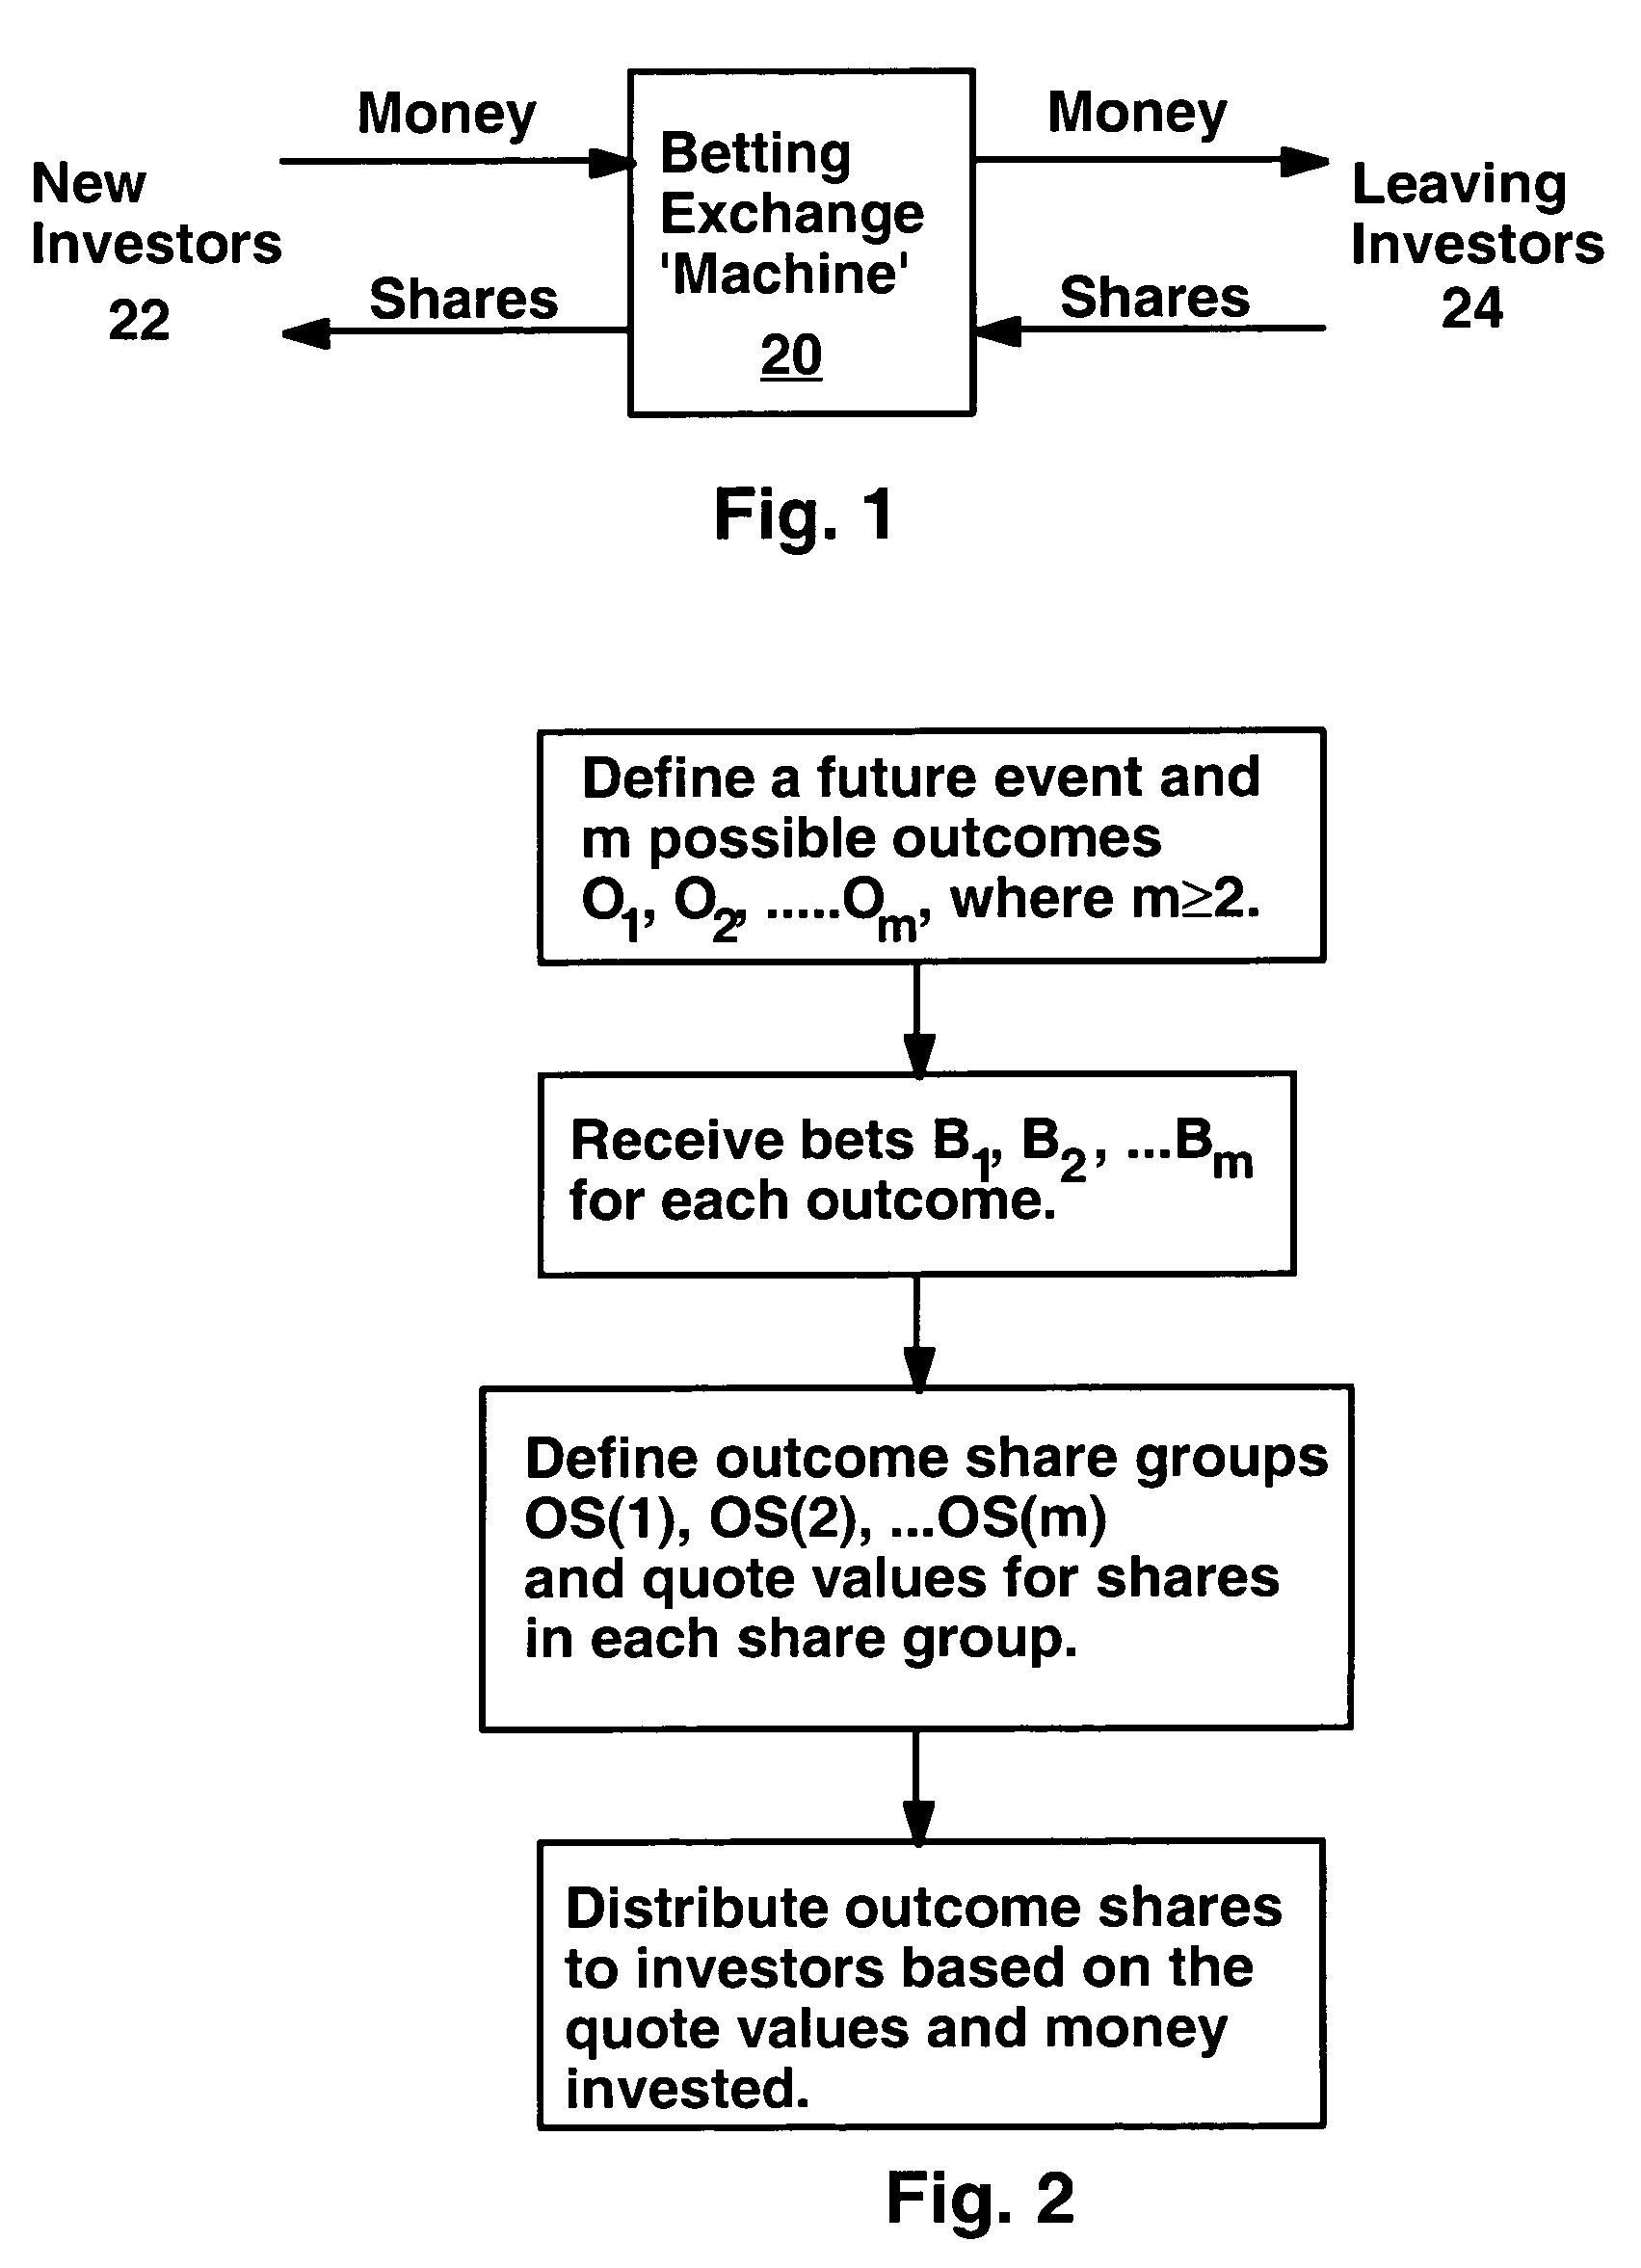 Method for reiterative betting based on supply and demand of betting shares